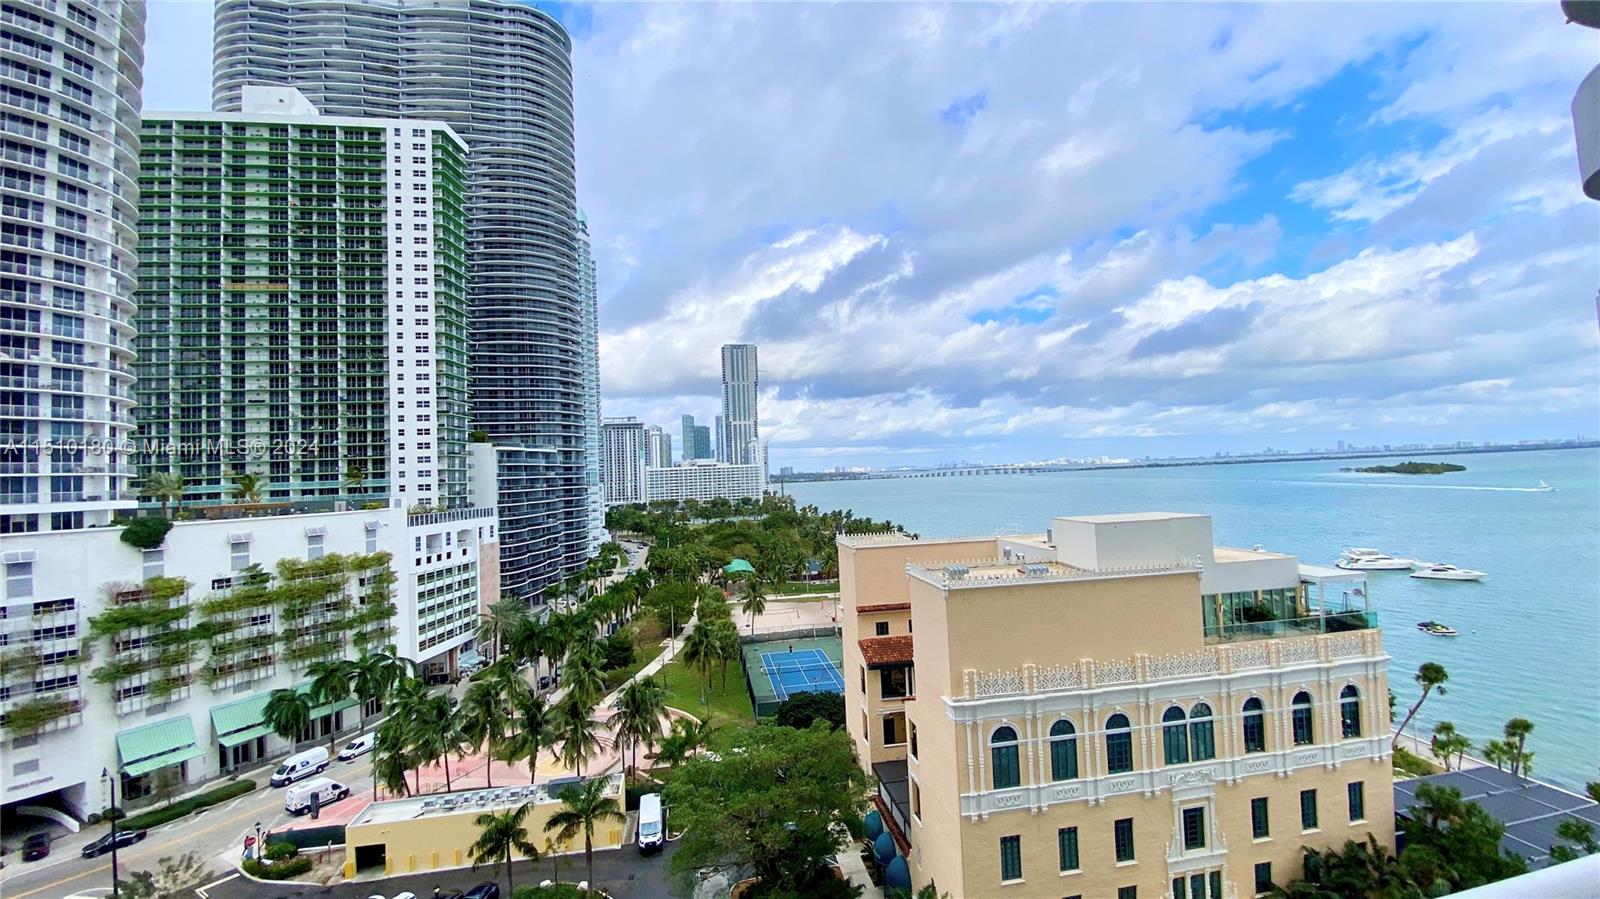 Beautifully furnished 1 BD, 1,5 Bathroom apartment in pristine condition. Unobstructed water view. Great kitchen and large walking closet space. Located in the Grand Condominium featuring beautiful water and city views! walking distance the Adrienne Arsht Center for the Performing Arts, American Airlines Arena and Bayfront Park. Discover the fun, food and shops at Bayside Marketplace or enjoy the proximity to Brickell, Midtown, Design District and Wynwood Arts District. Margaret Pace Park is right next to the building with lighted basketball, tennis and a volleyball courts. Can be rented for no less then 30 days 12 times a year or on a daily bases under the hotel management programme.